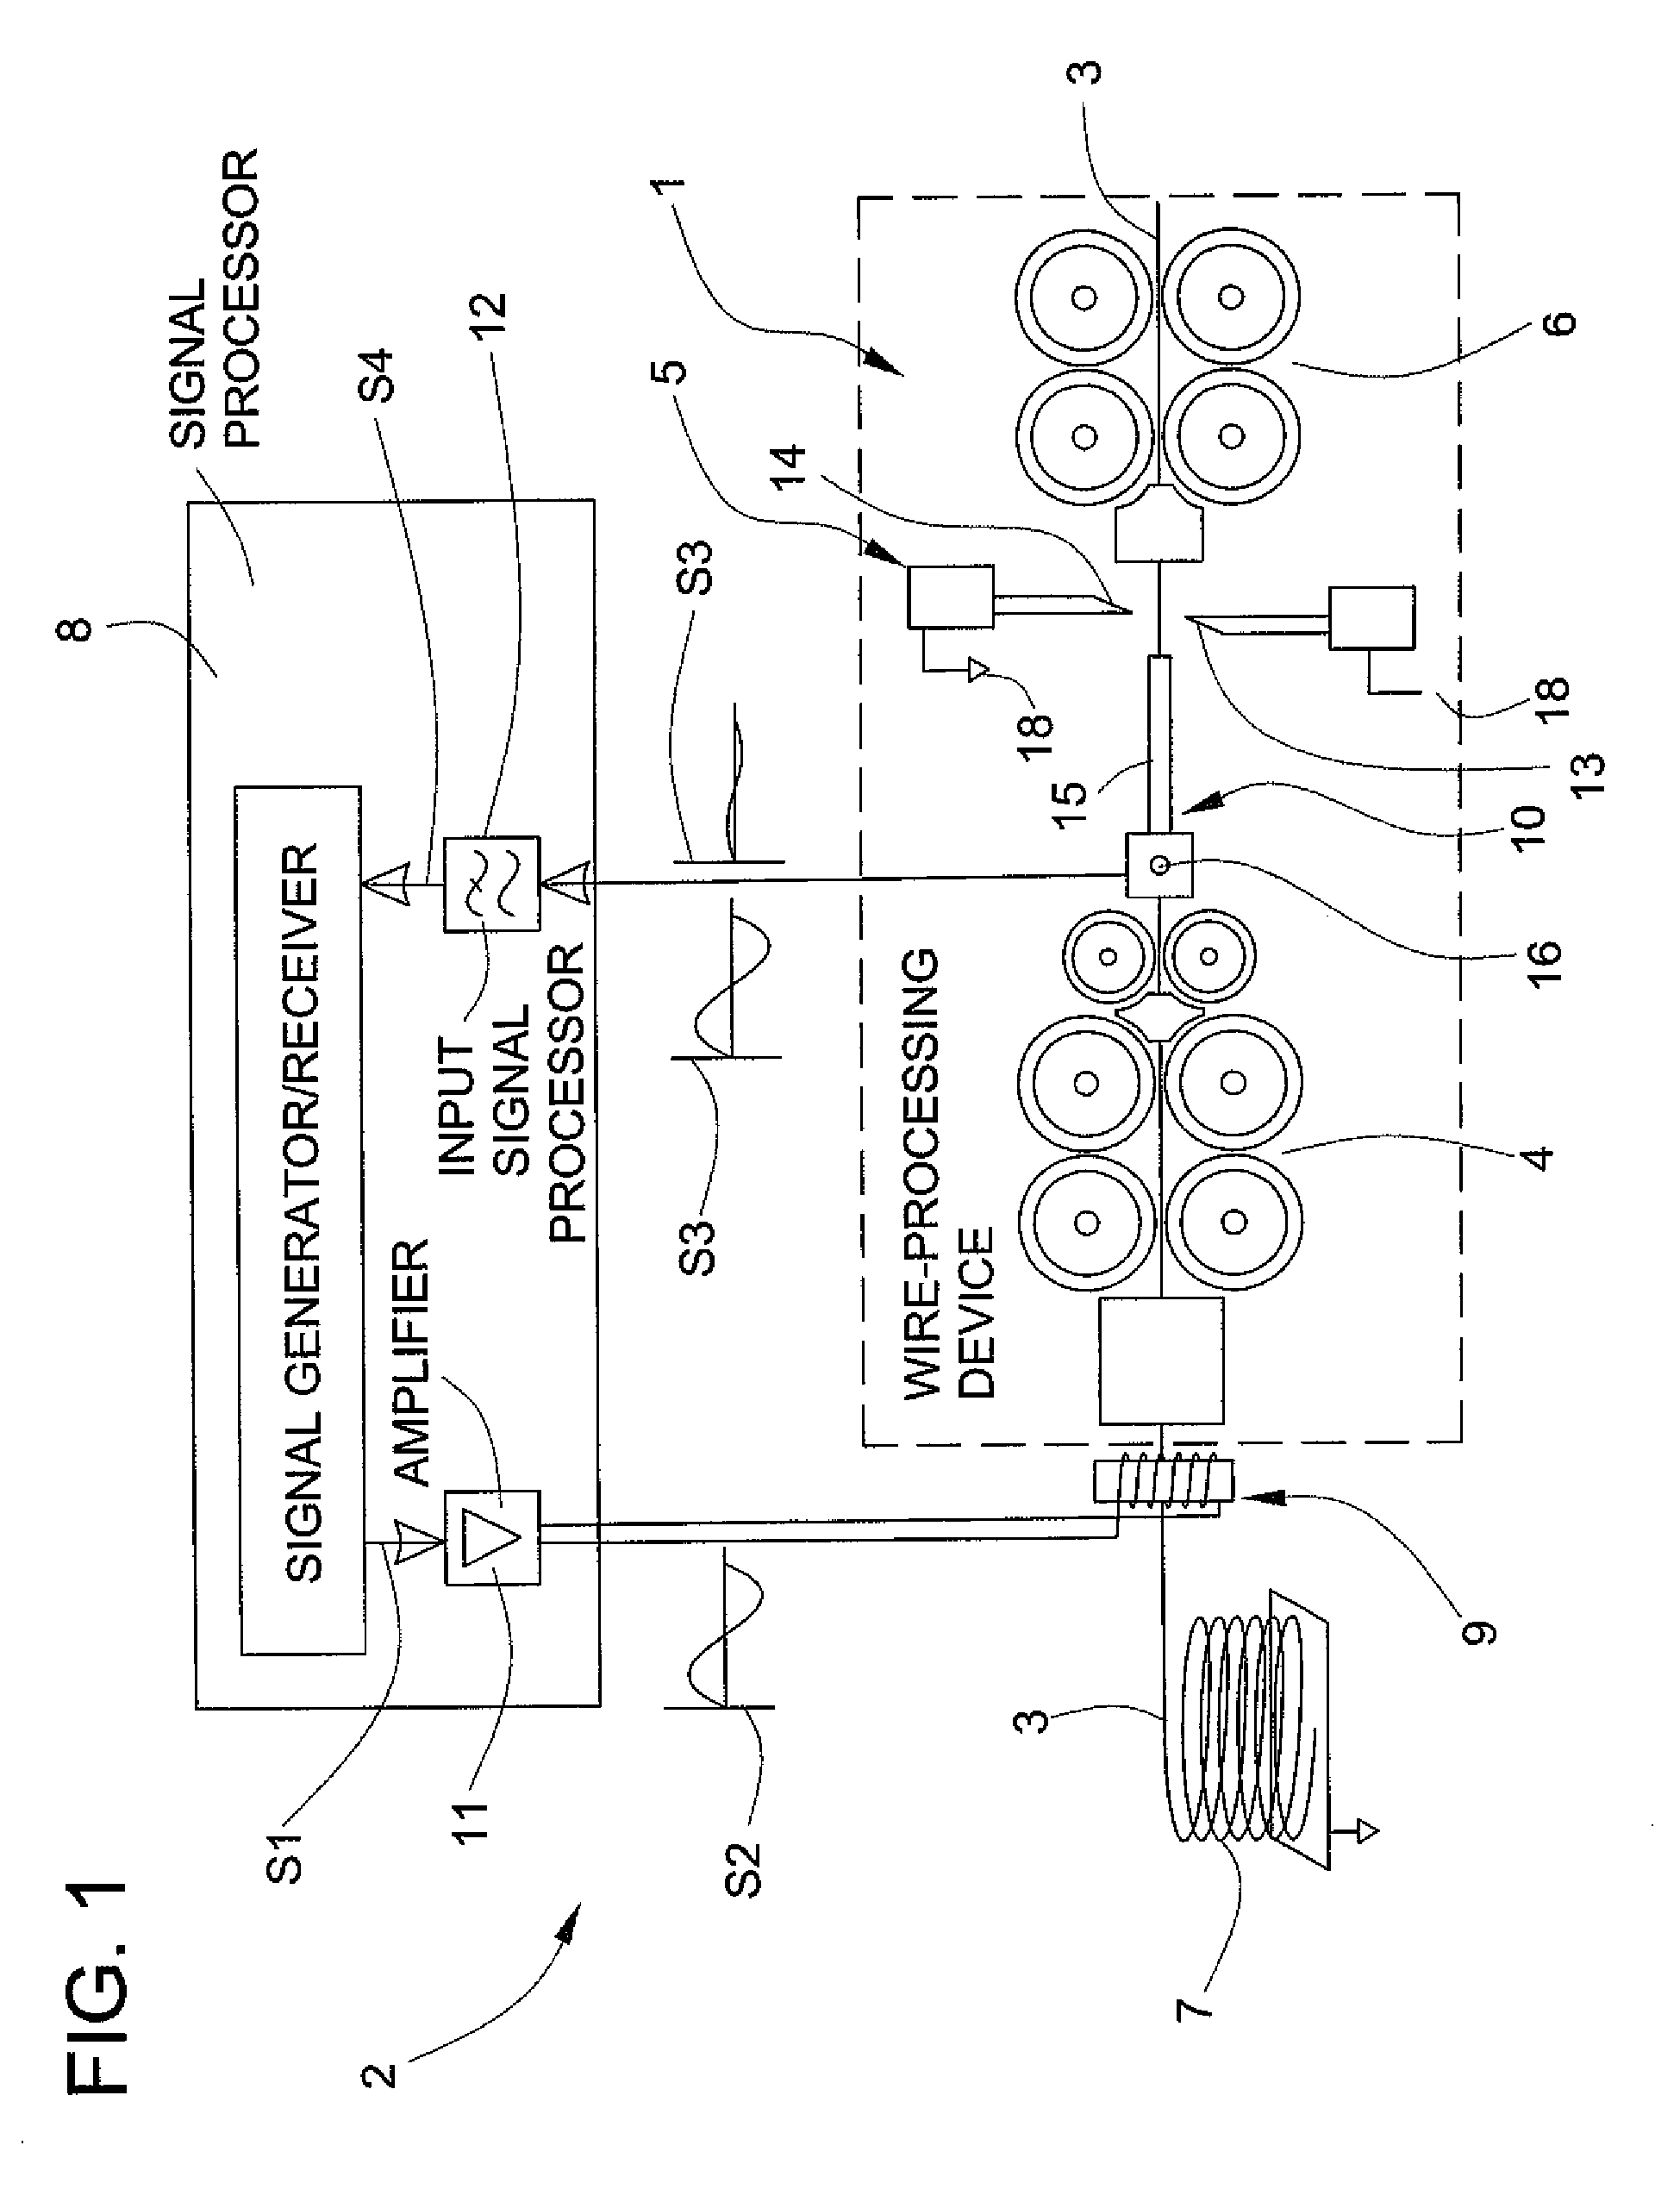 Device to Determine the Diameter of the Conductor of a Wire